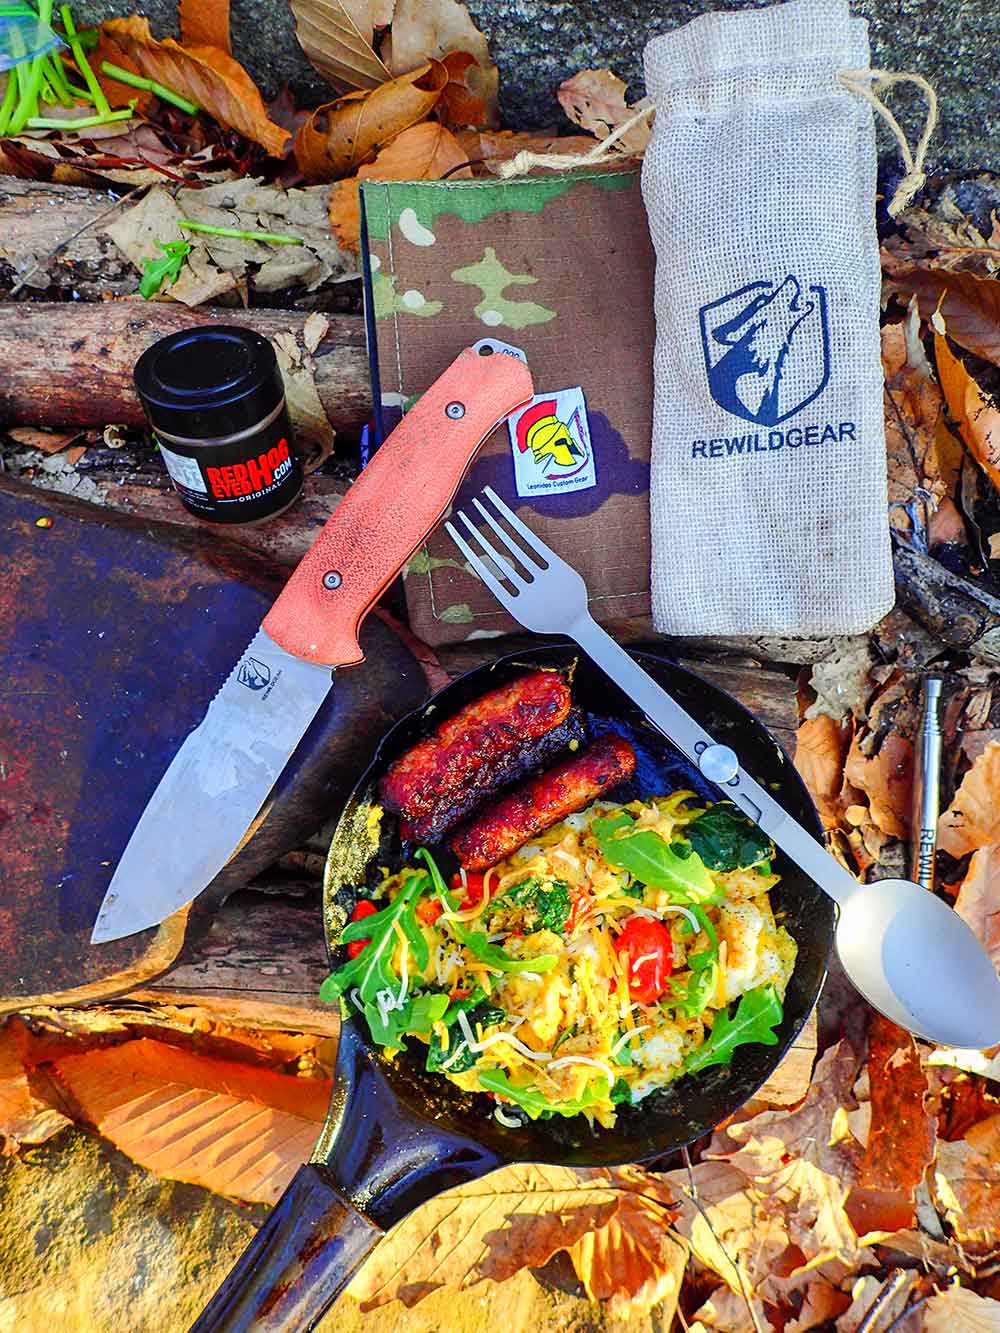 Sausage, egg, tomatoes, arugula, spinach, and cheese scramble prepped with the Gasper 4 knife along with the fire. The Rewild Gear Trailside Utensil was on hand and equipped with a fork, spoon, and bottle opener all in one.